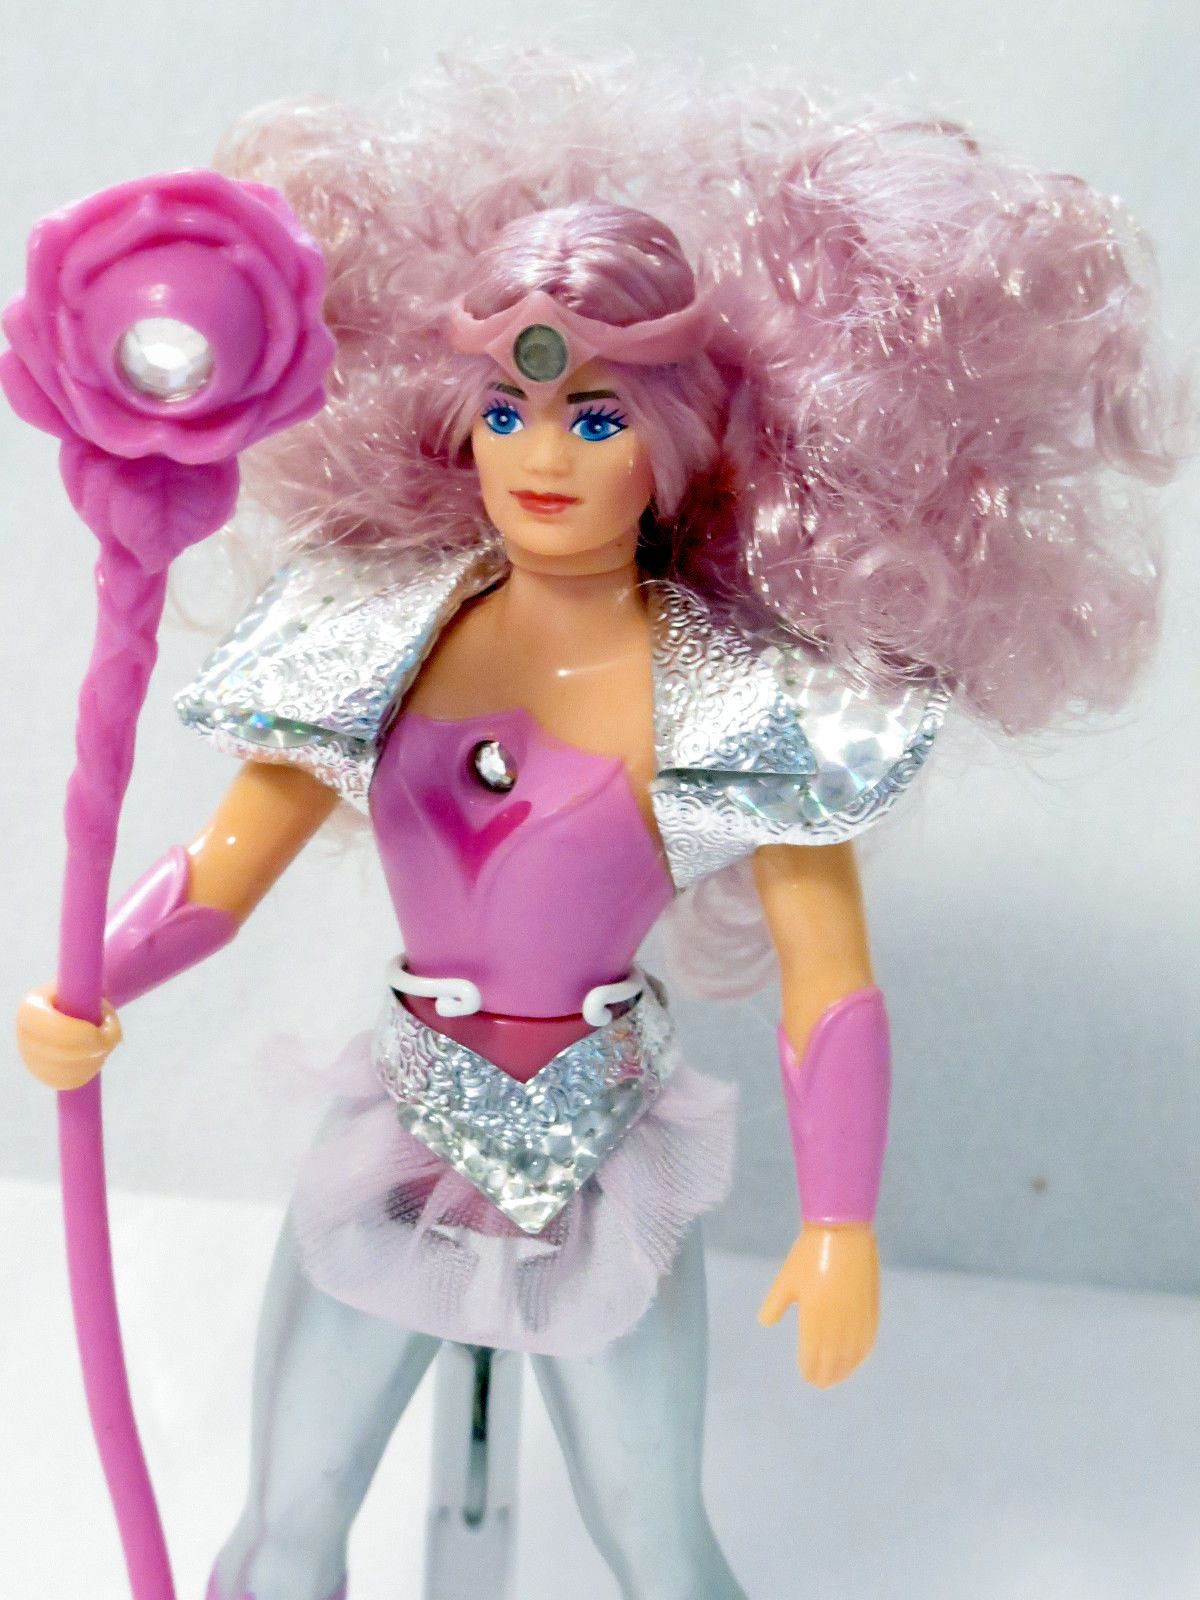 She-Ra: Princess of Power (1985) - (figures, dolls, toys and objects) 13